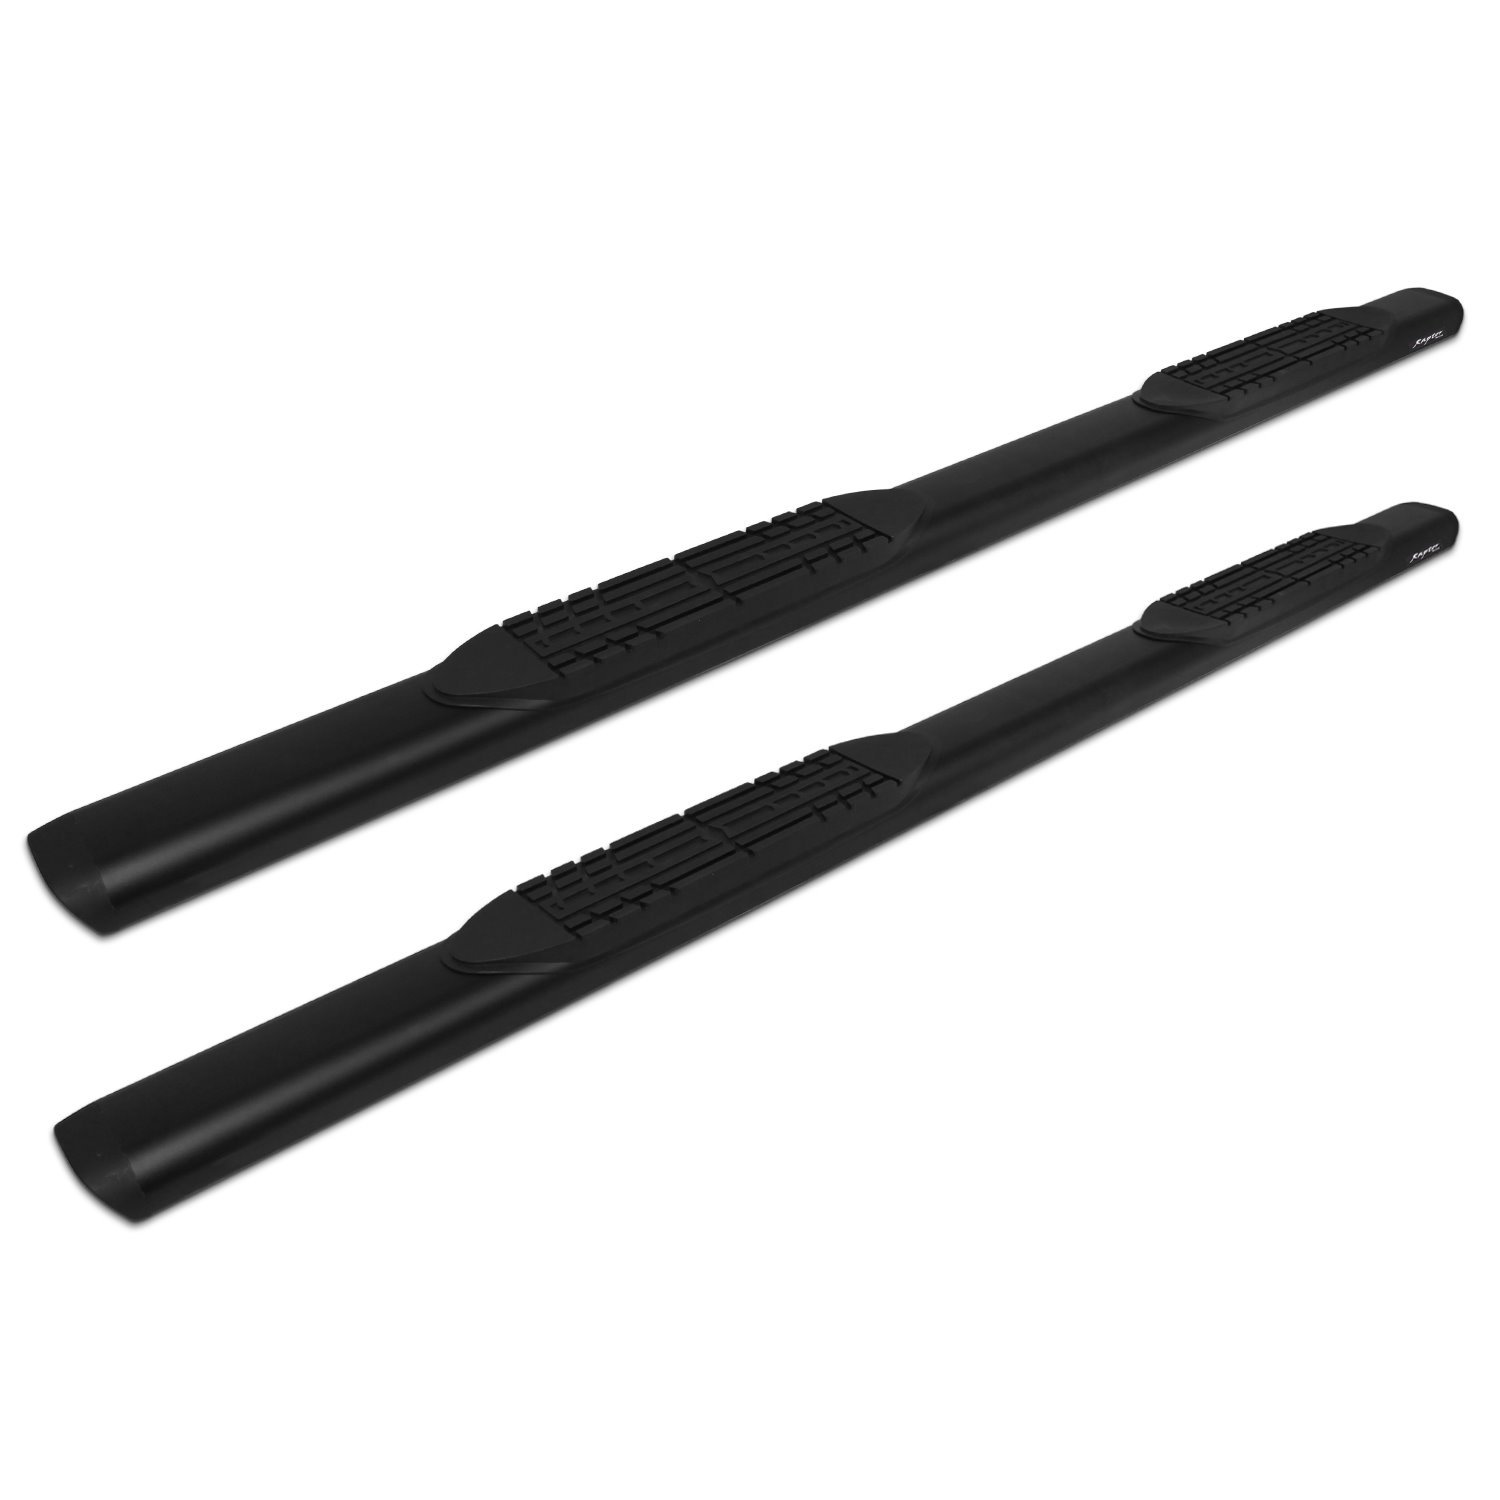 2007-0589BT Raptor Series 5 in Oval Style Slide Track Running Boards, Black Aluminum, Fits Select Nissan Frontier Crew Cab